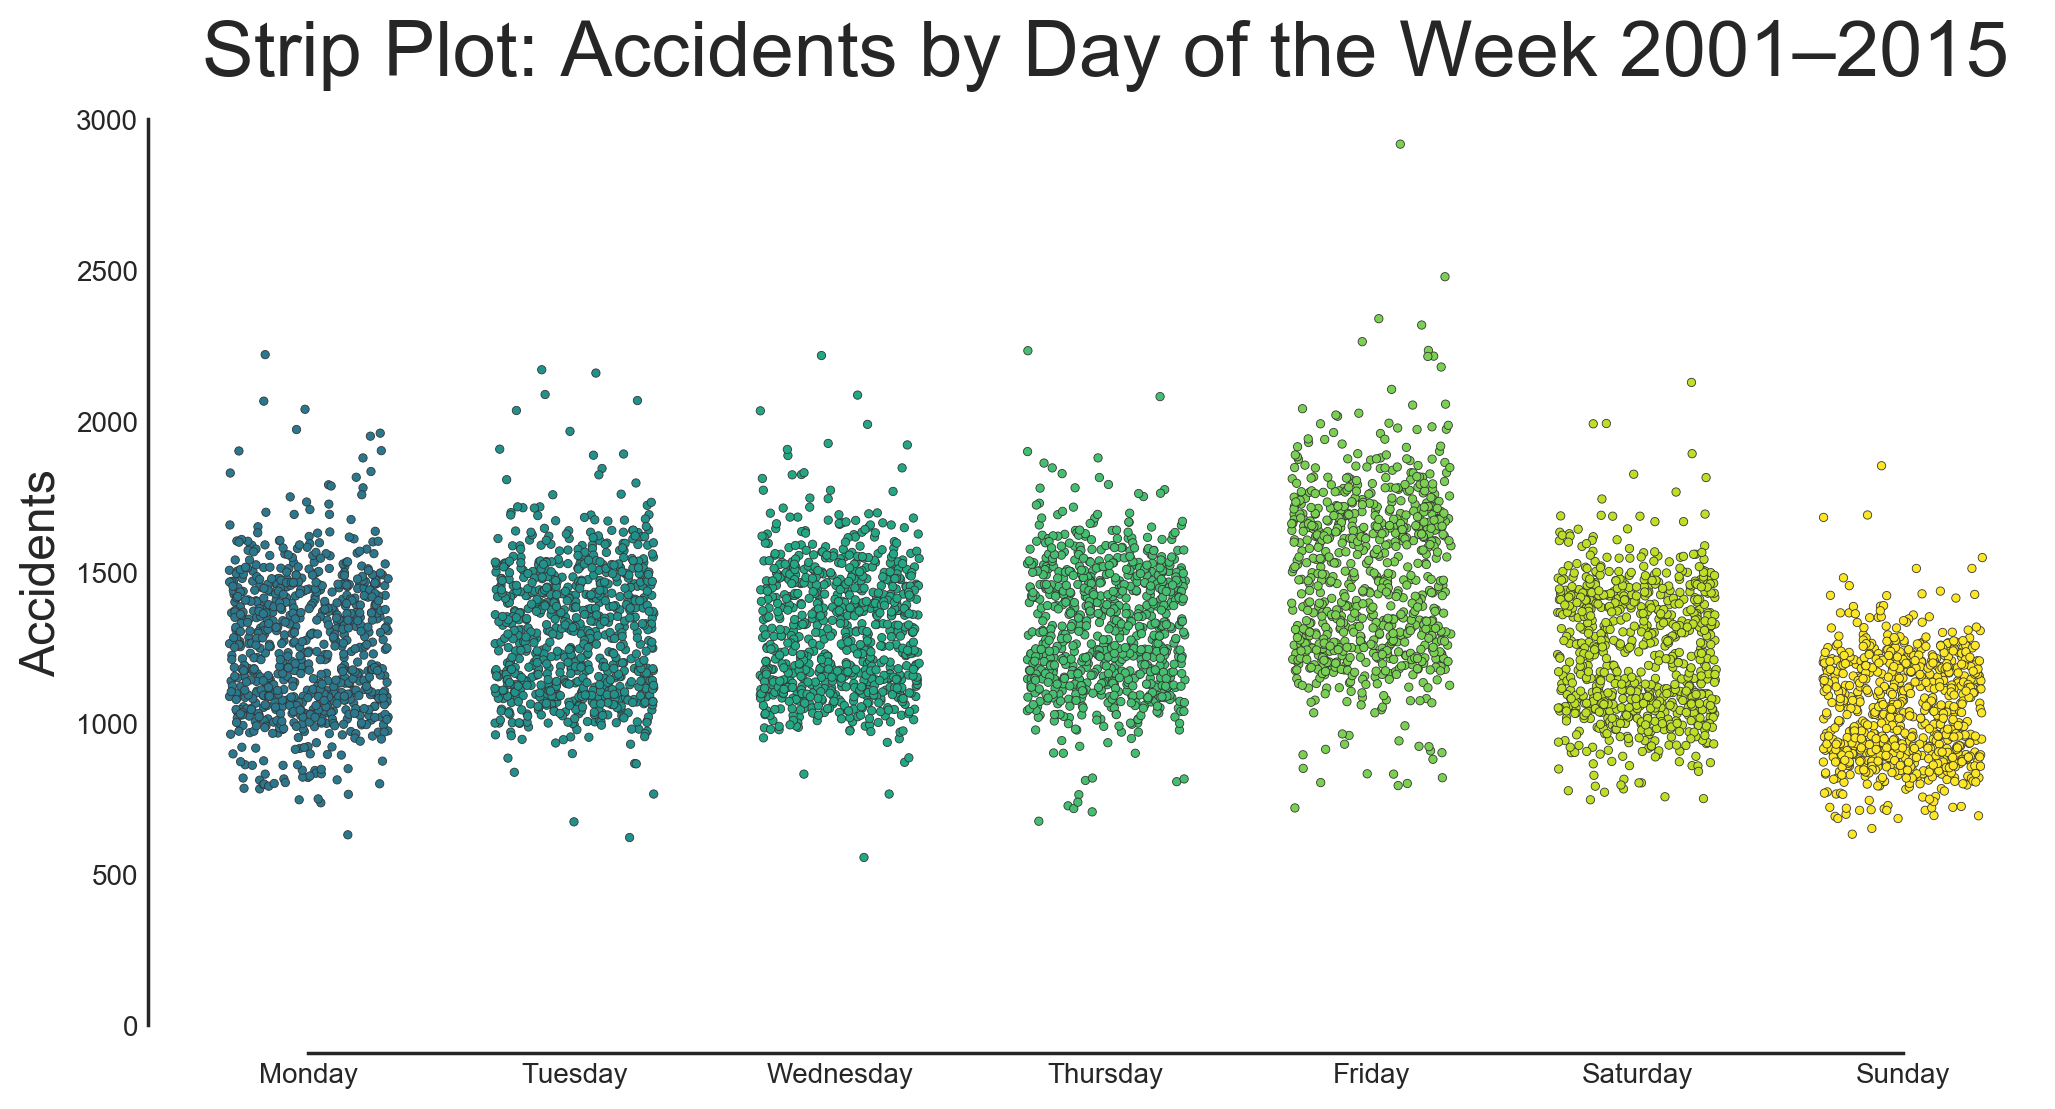 A strip plot showing the distribution of crashes per day in California from 2001–2015 by day of the week.